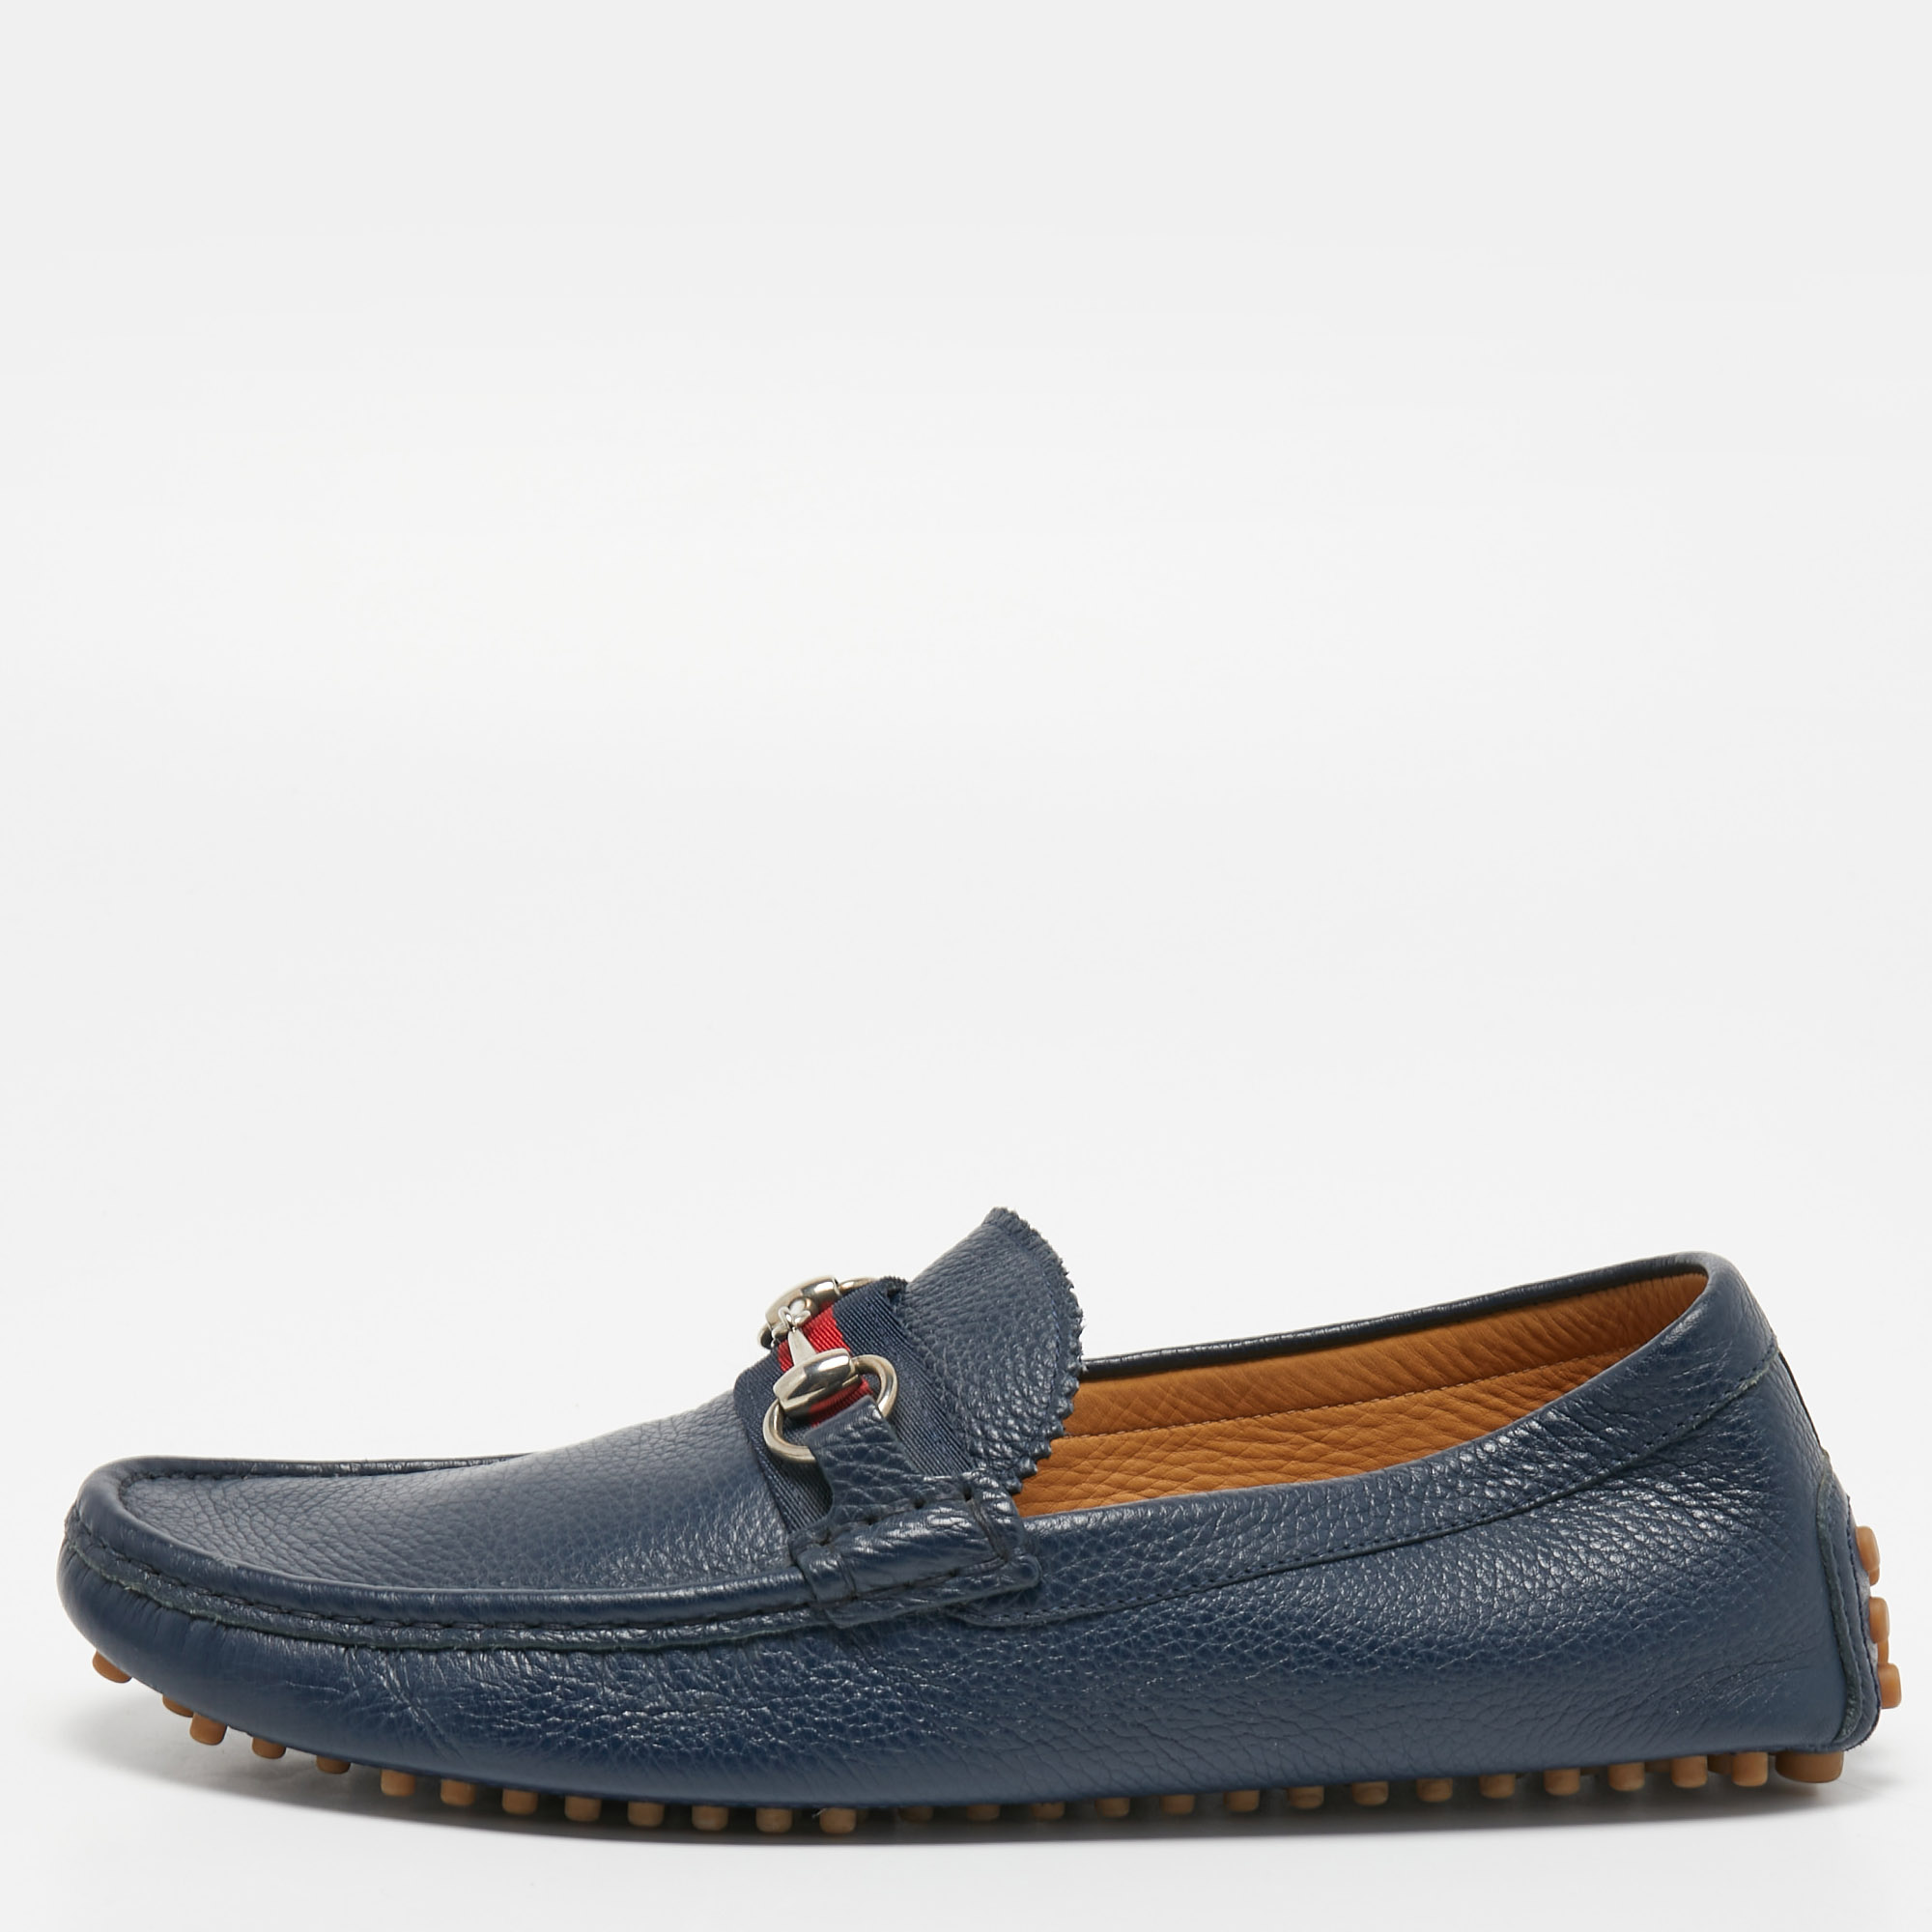 Pre-owned Gucci Navy Blue Leather Horsebit Slip On Loafers Size 42.5